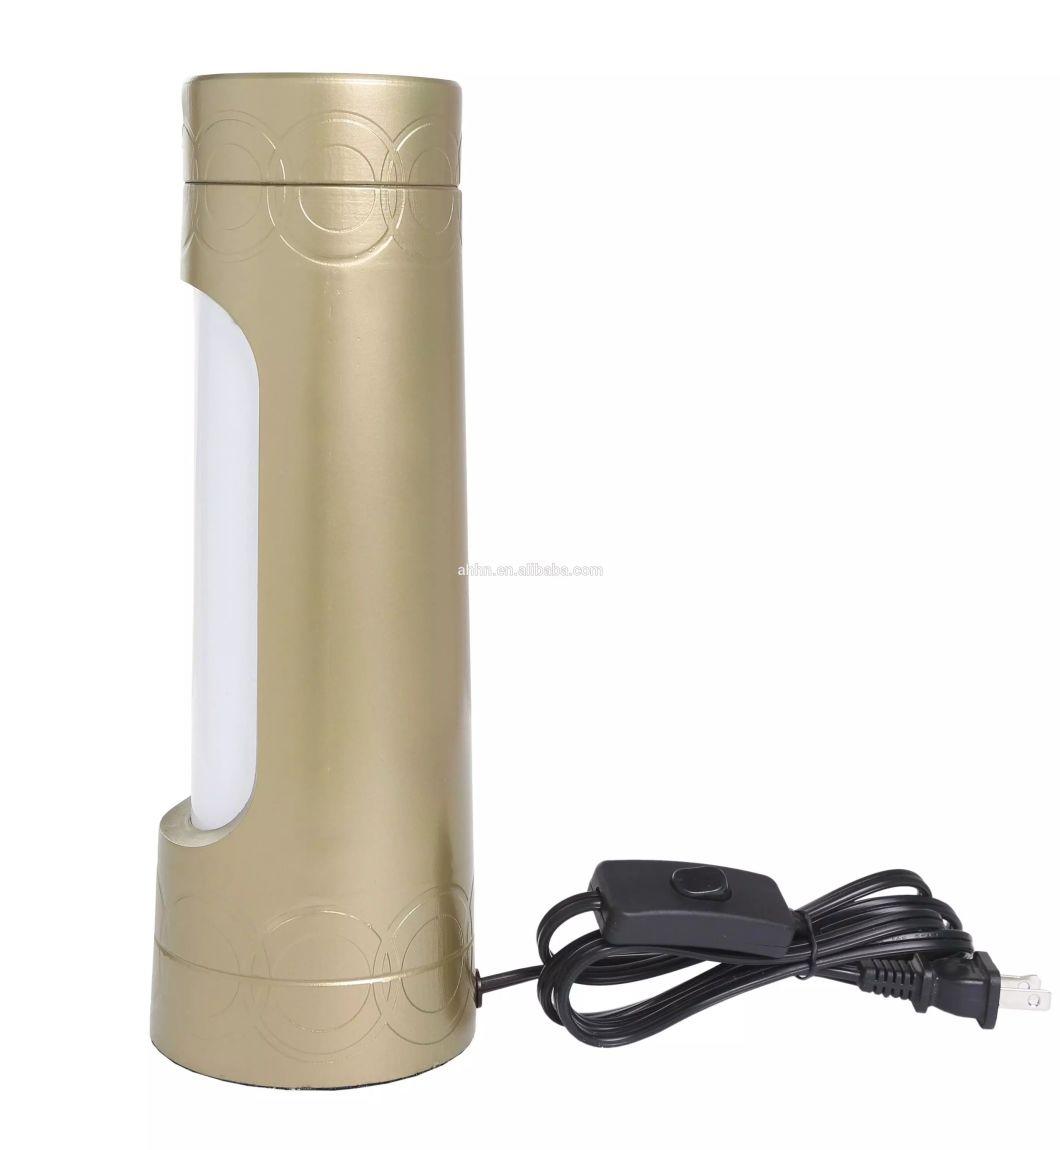 Gold Color Shabbat Electric LED Table Lamp for Night